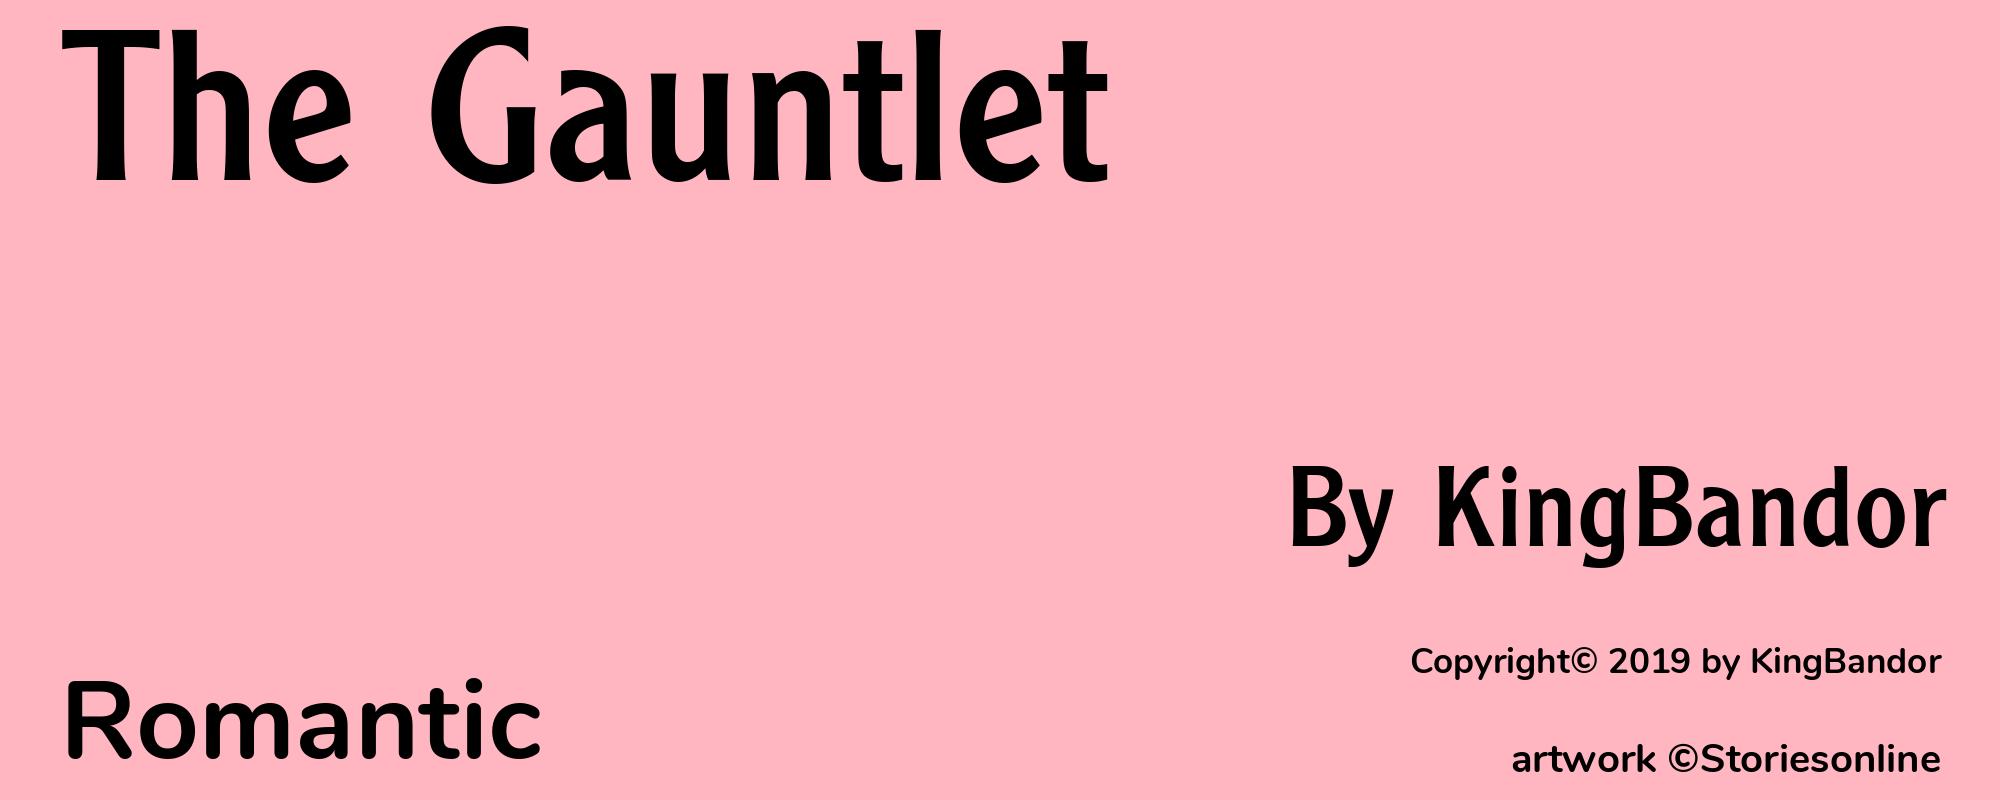 The Gauntlet - Cover